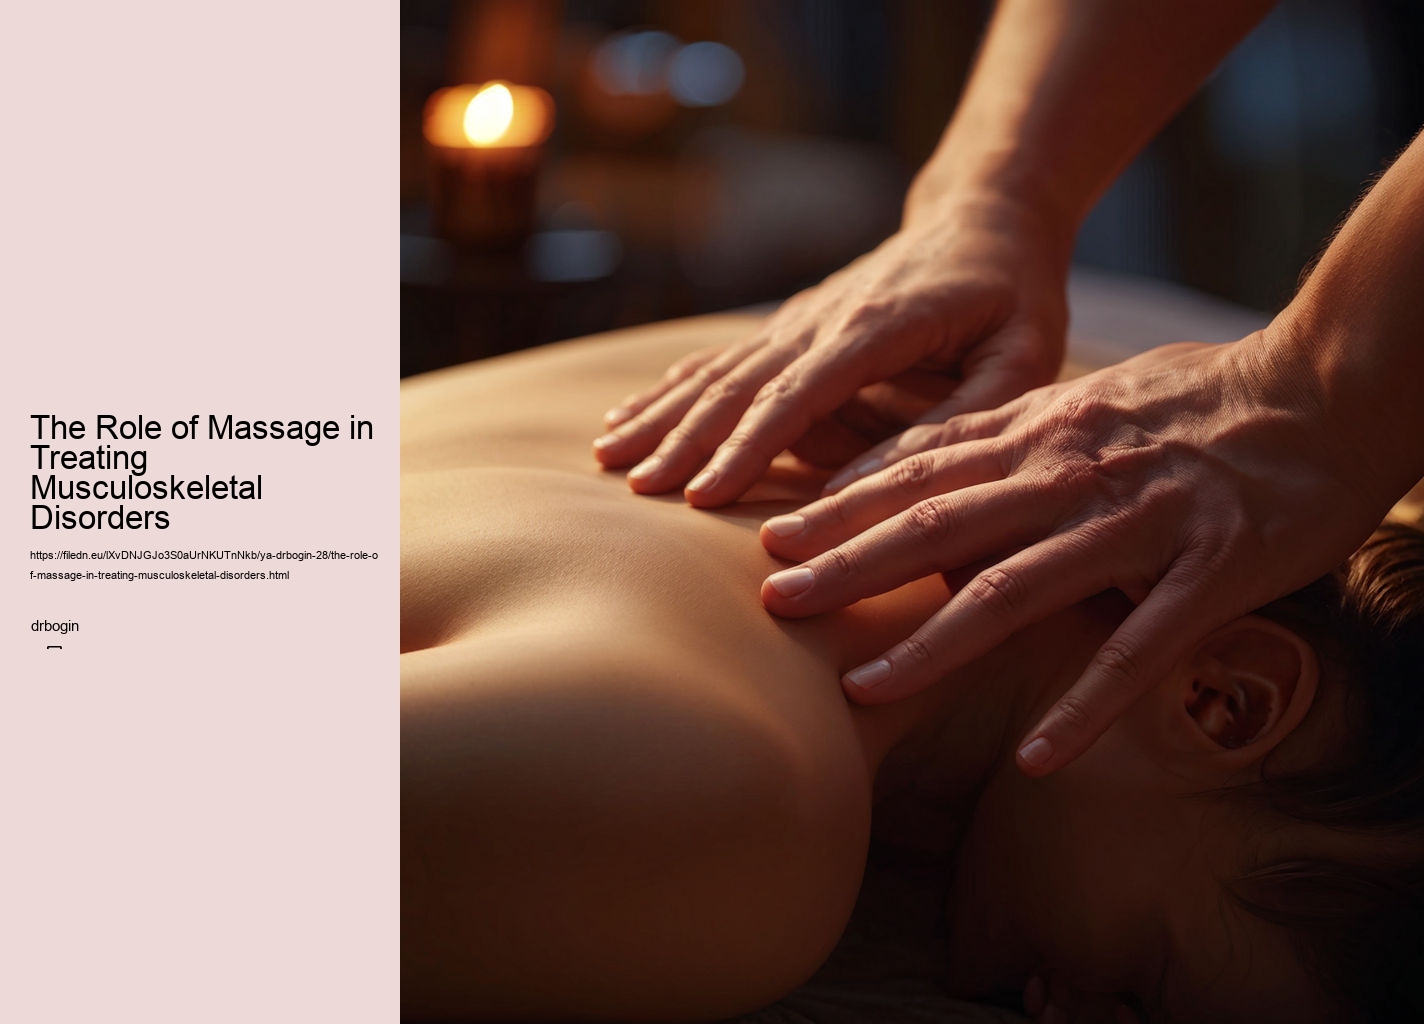 The Role of Massage in Treating Musculoskeletal Disorders